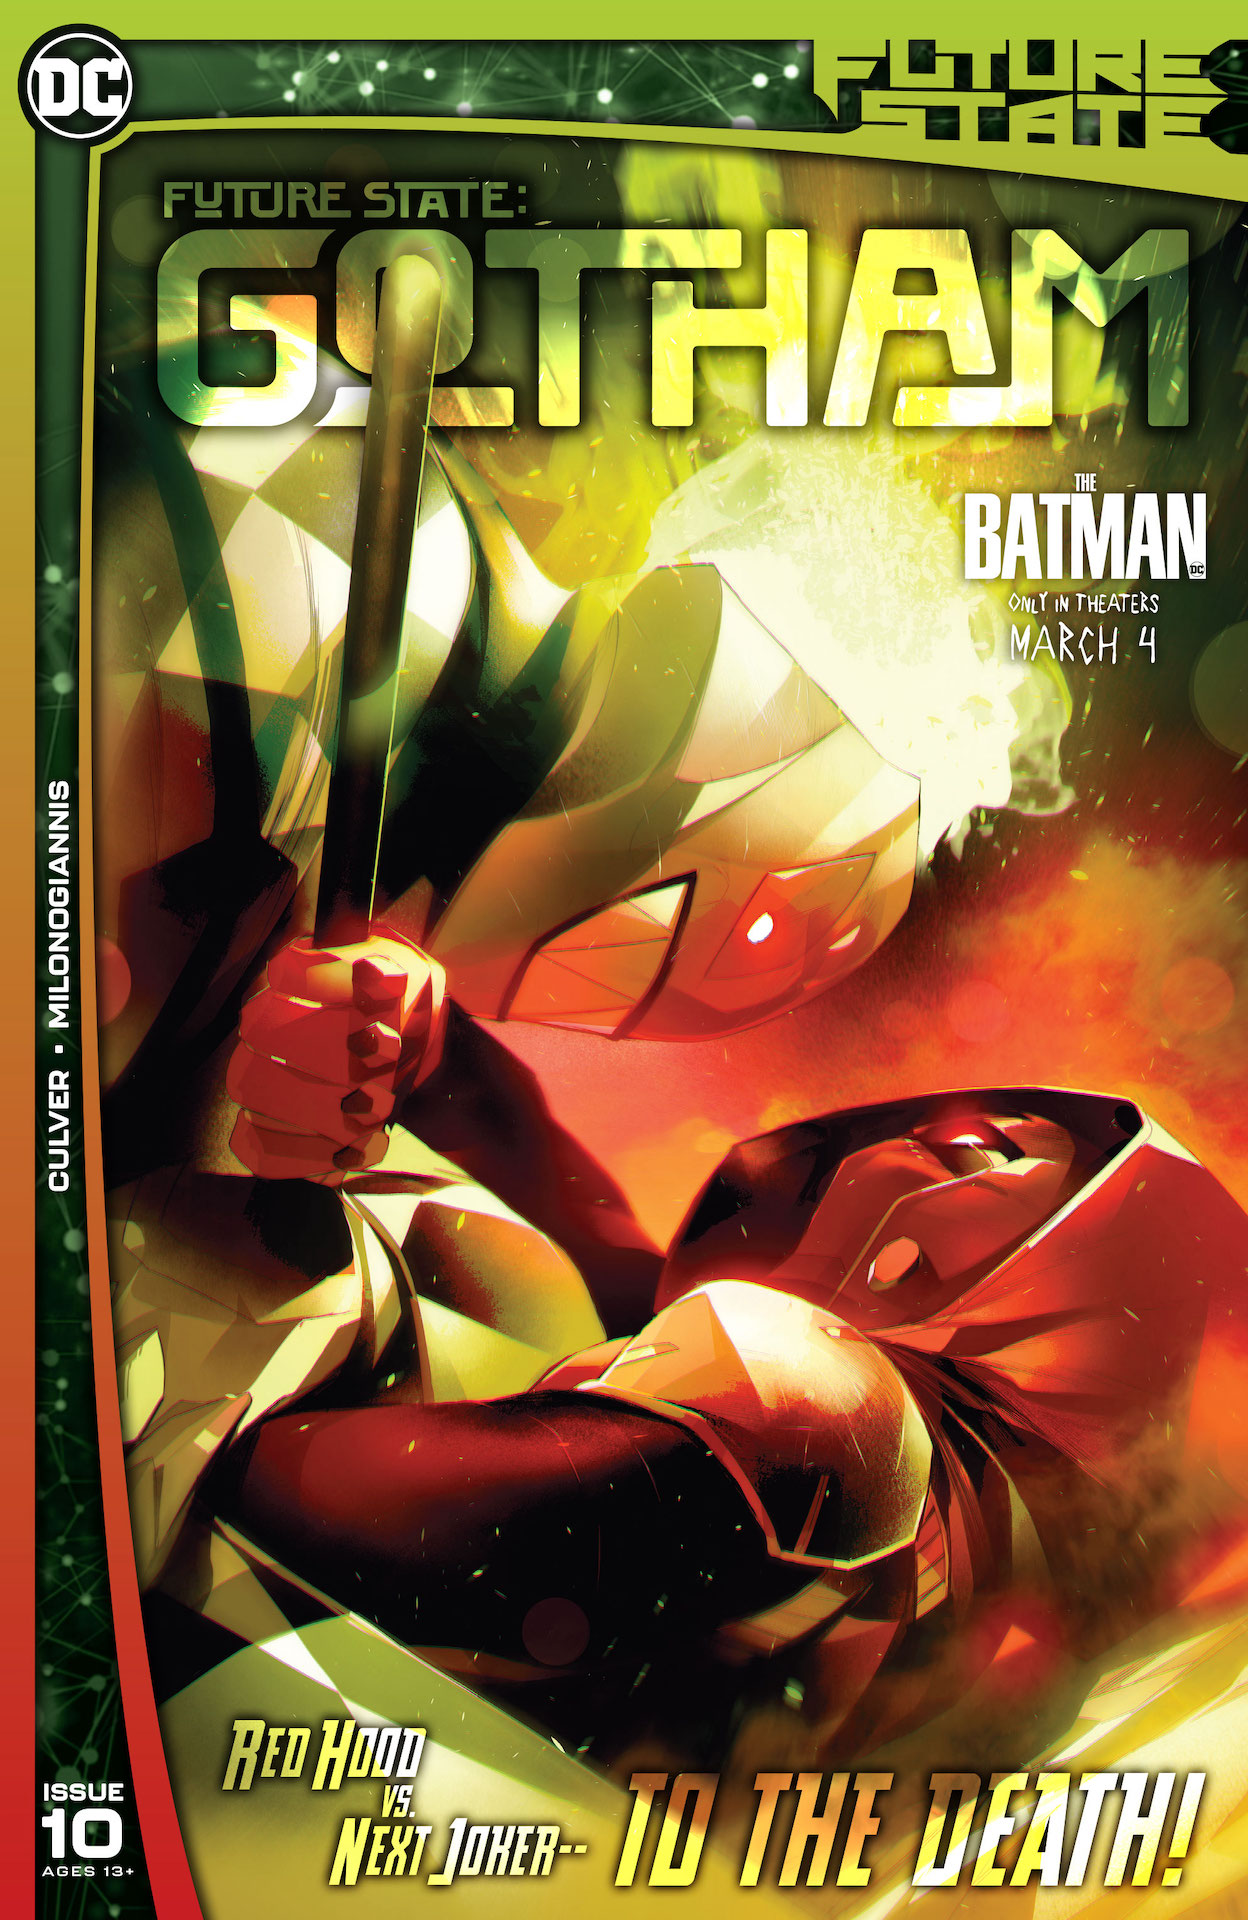 DC Peview: Future State #10: Gotham